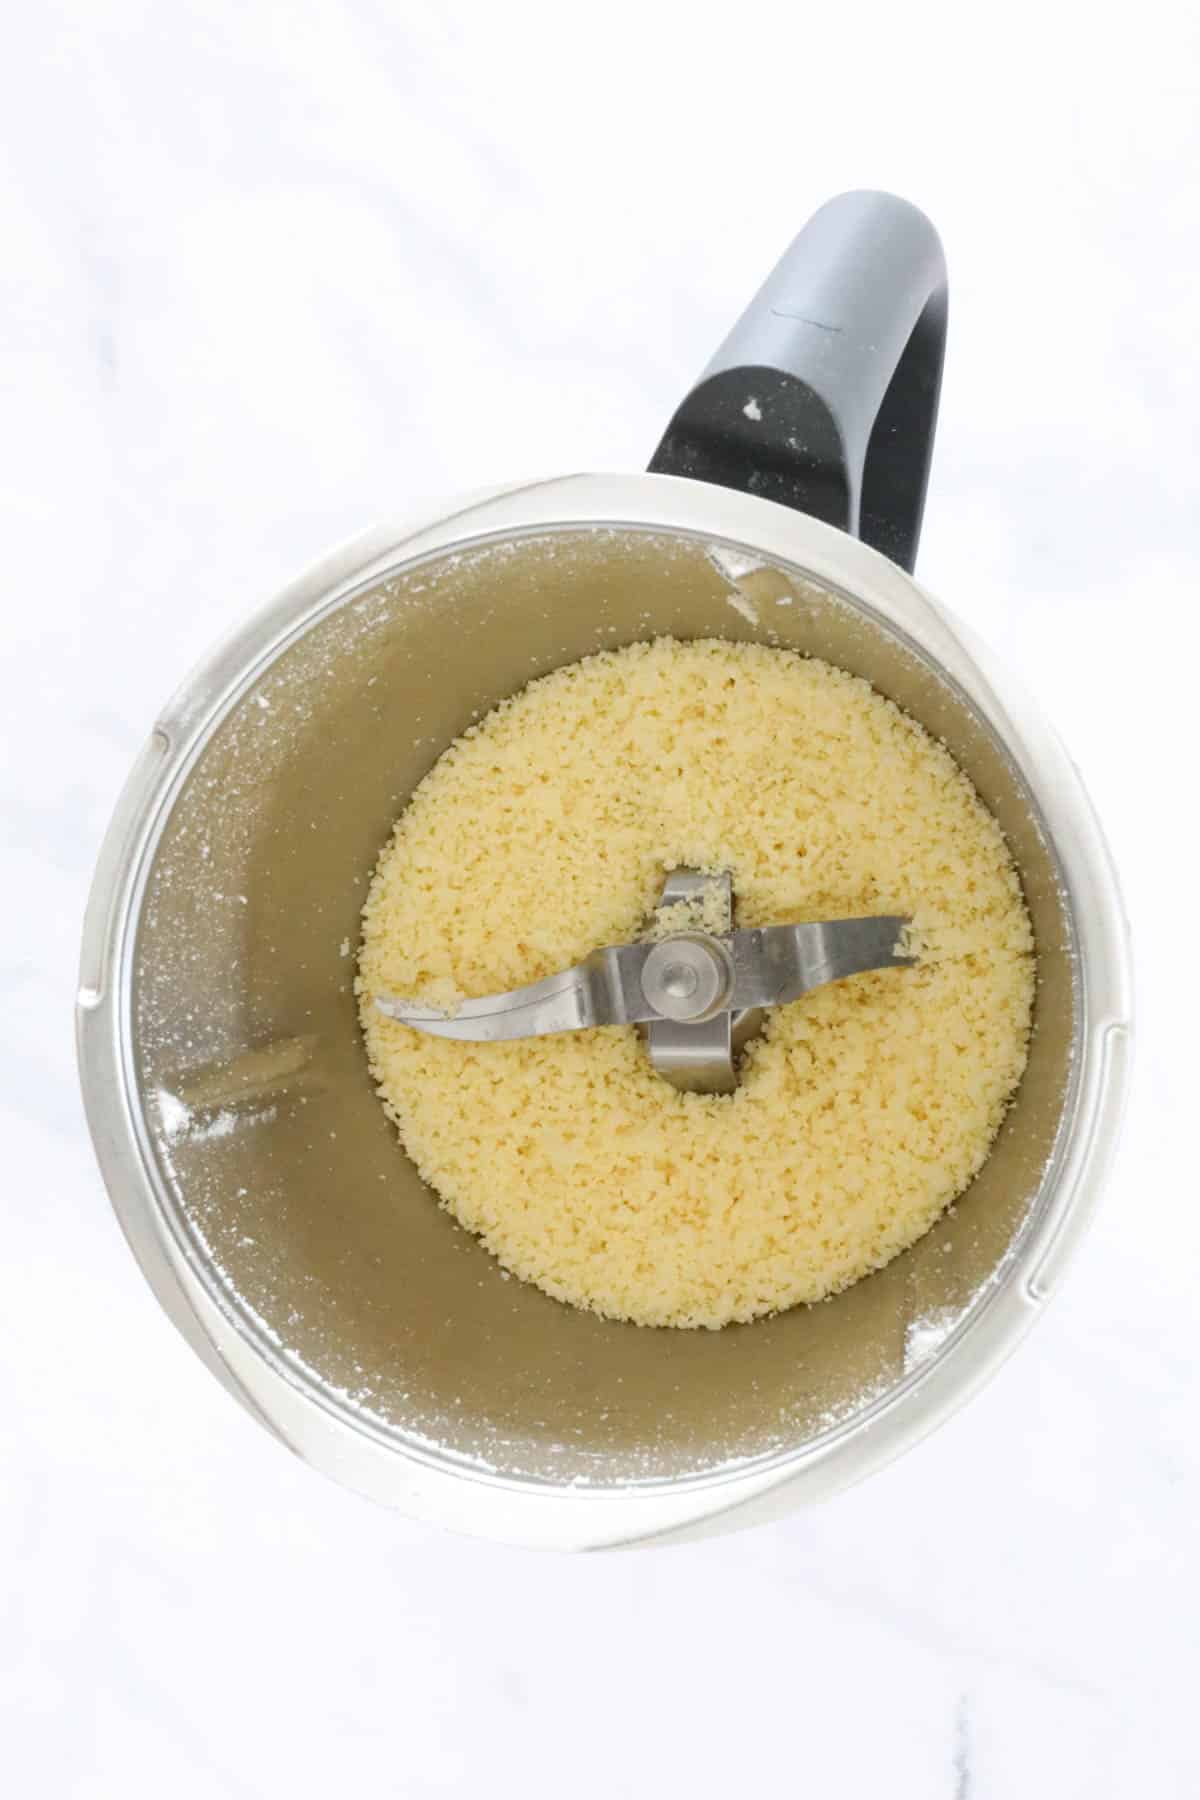 Grated cheese in a stainless bowl.